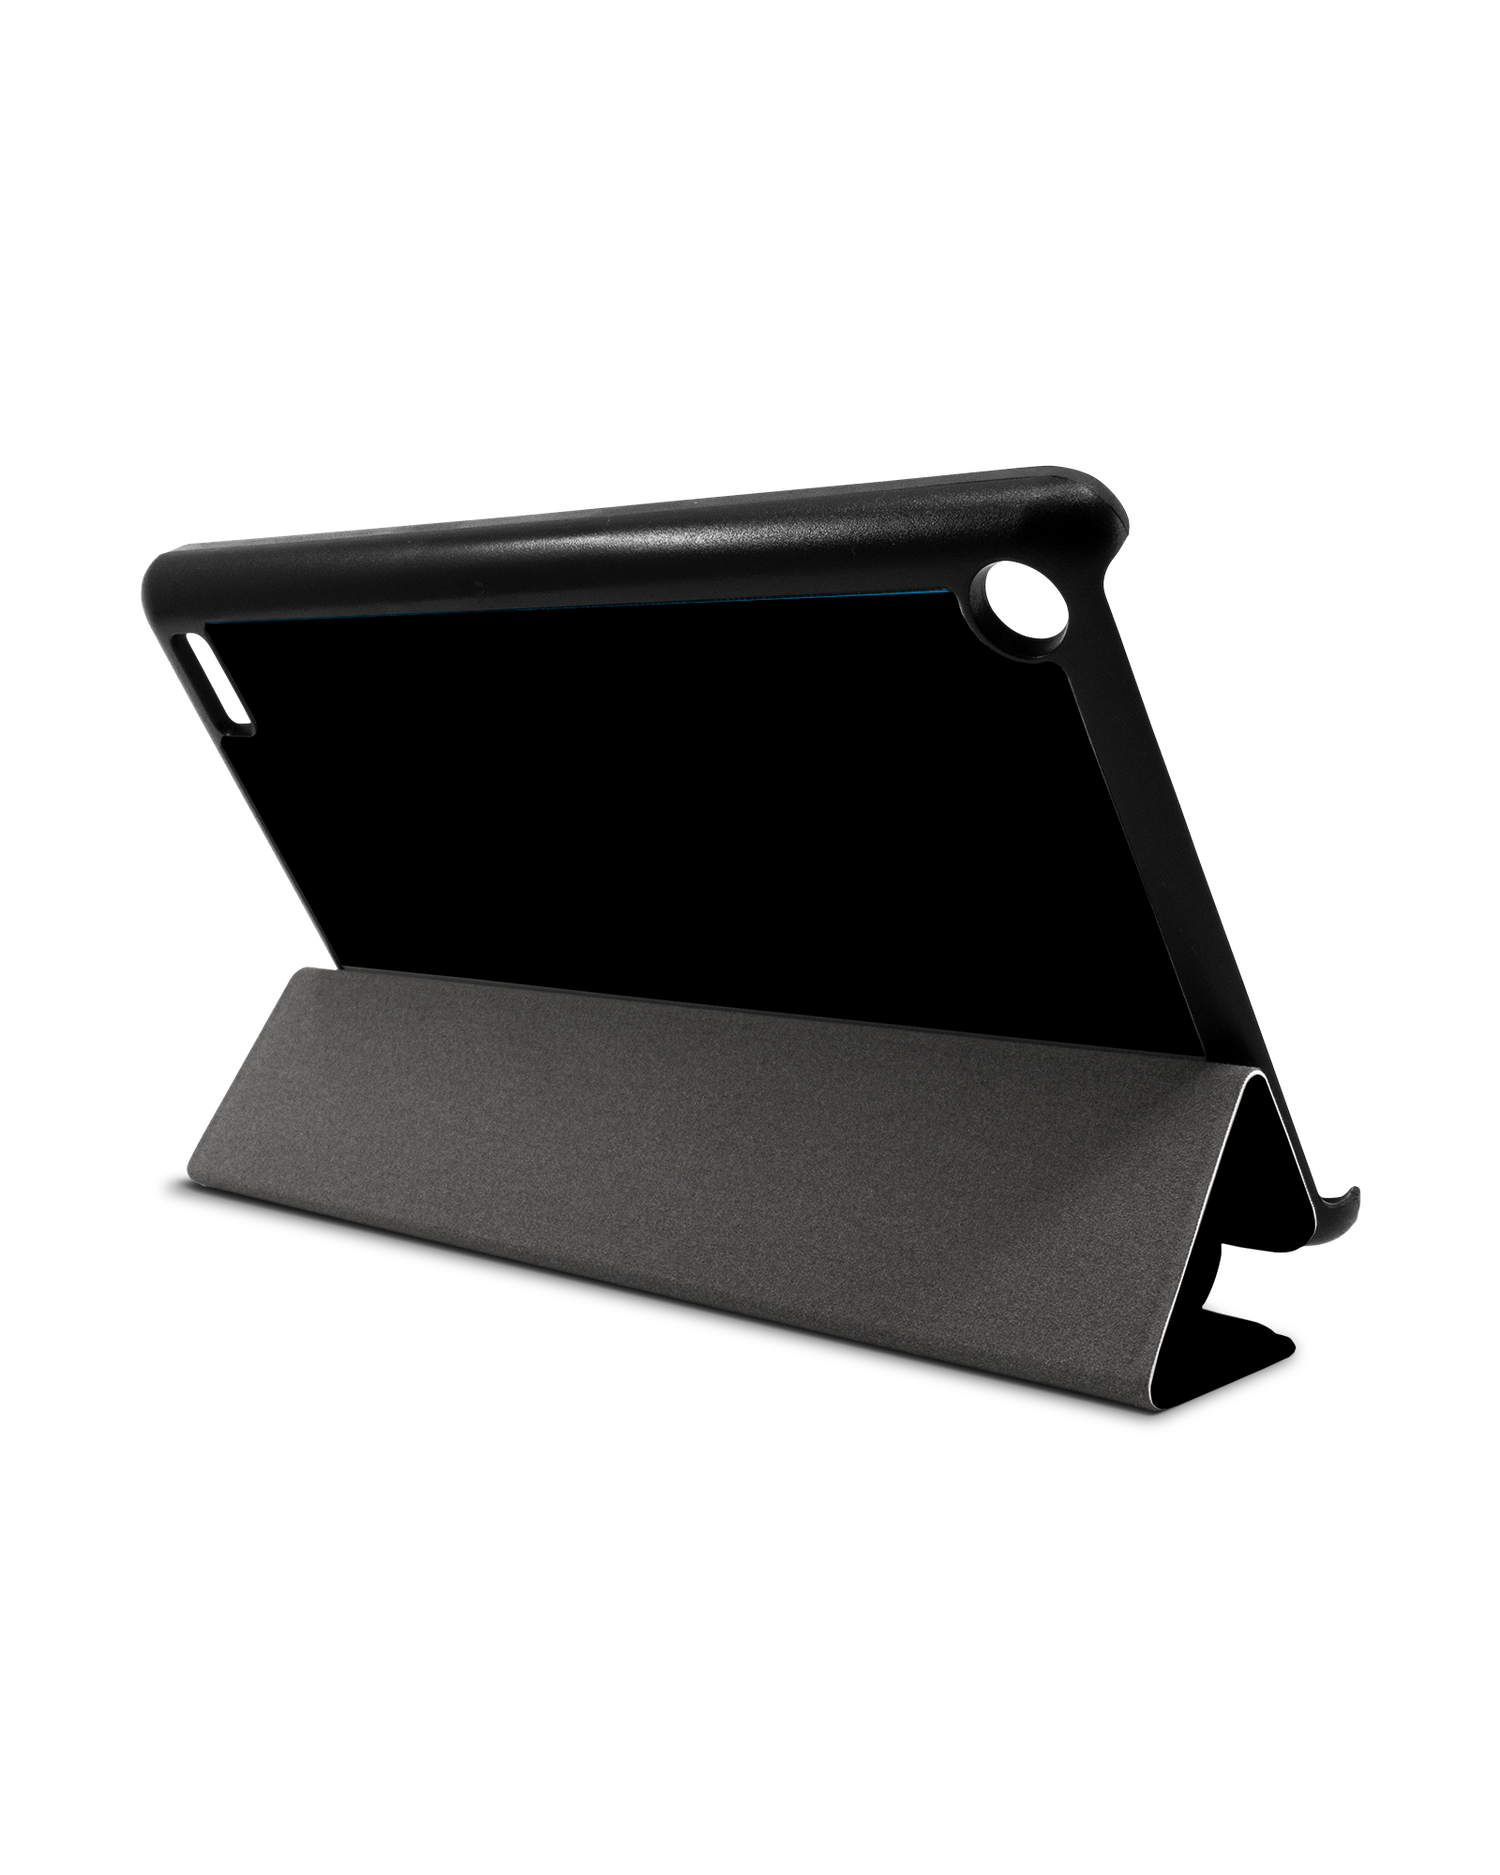 Classy Sassy Tablet Smart Case for Amazon Fire 7: Used as Stand